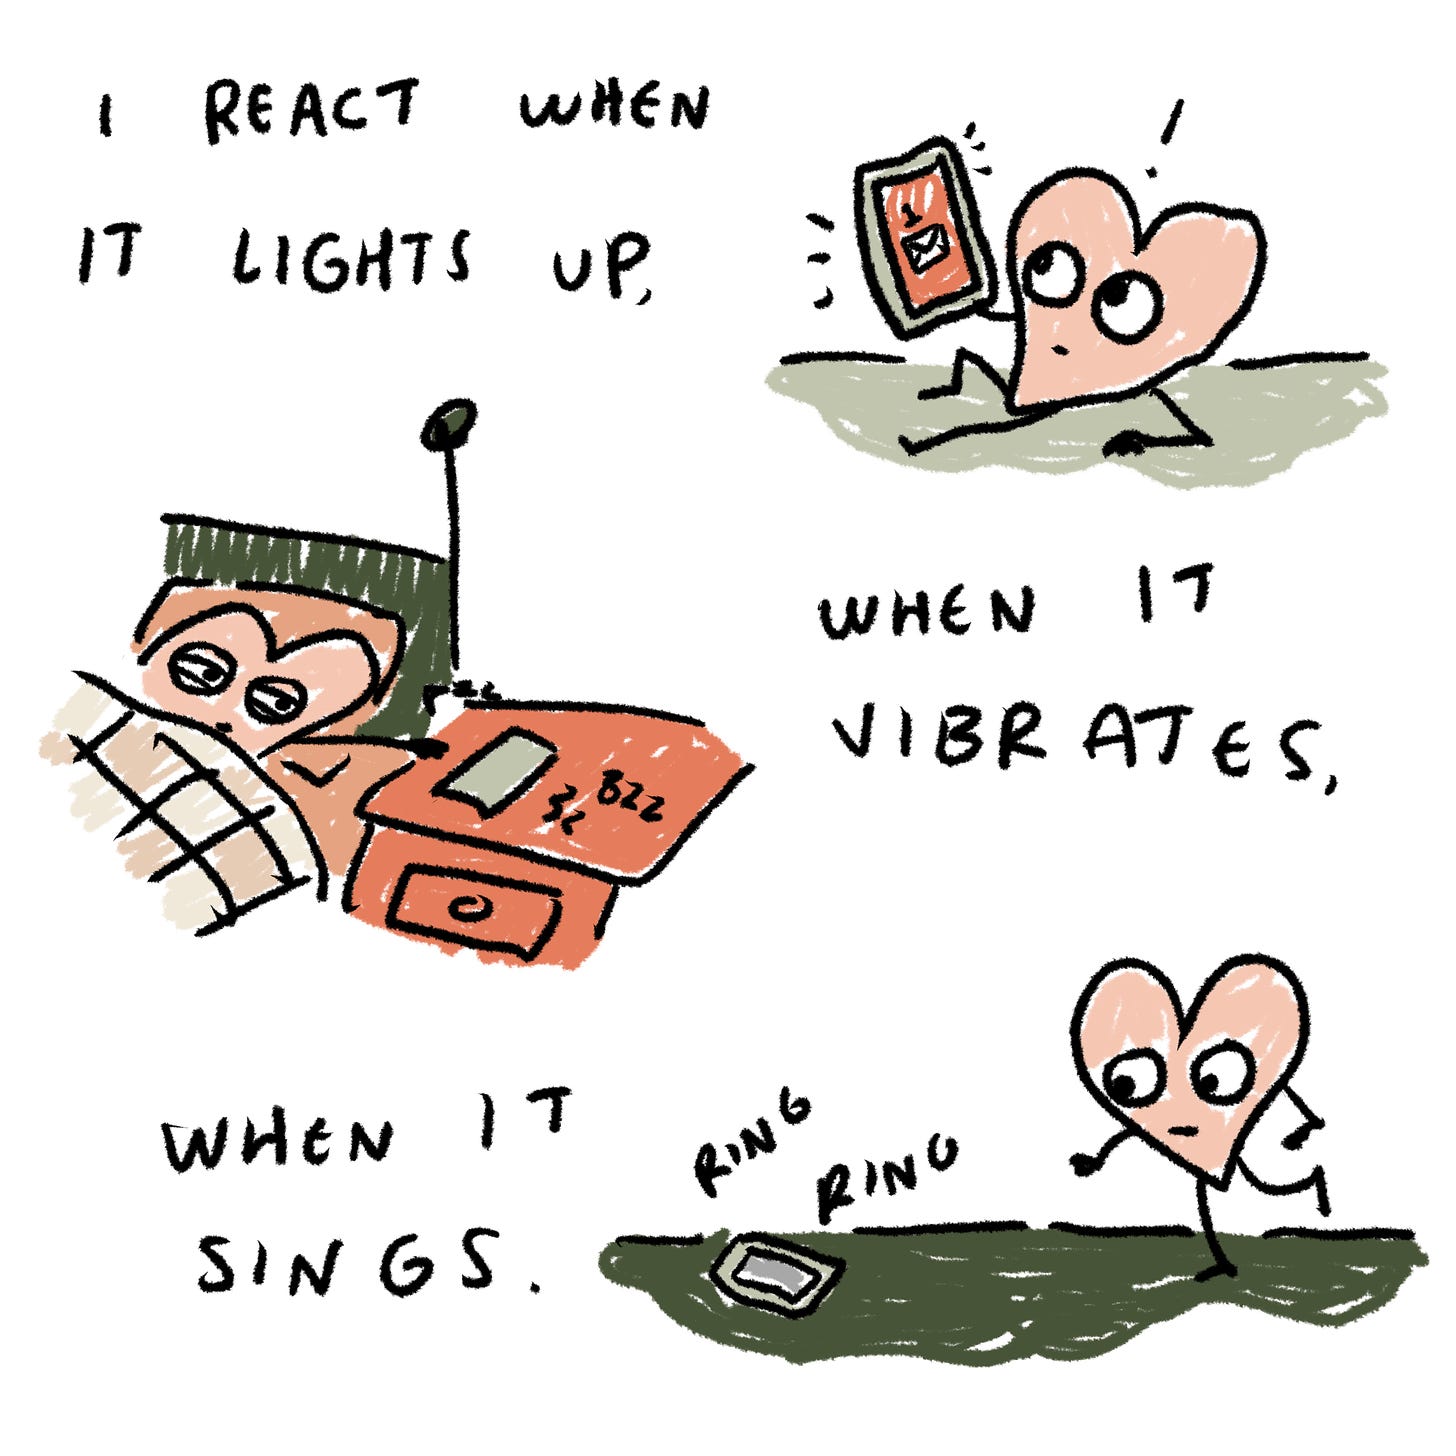  I react when it lights up, when it vibrates, when it sings. 